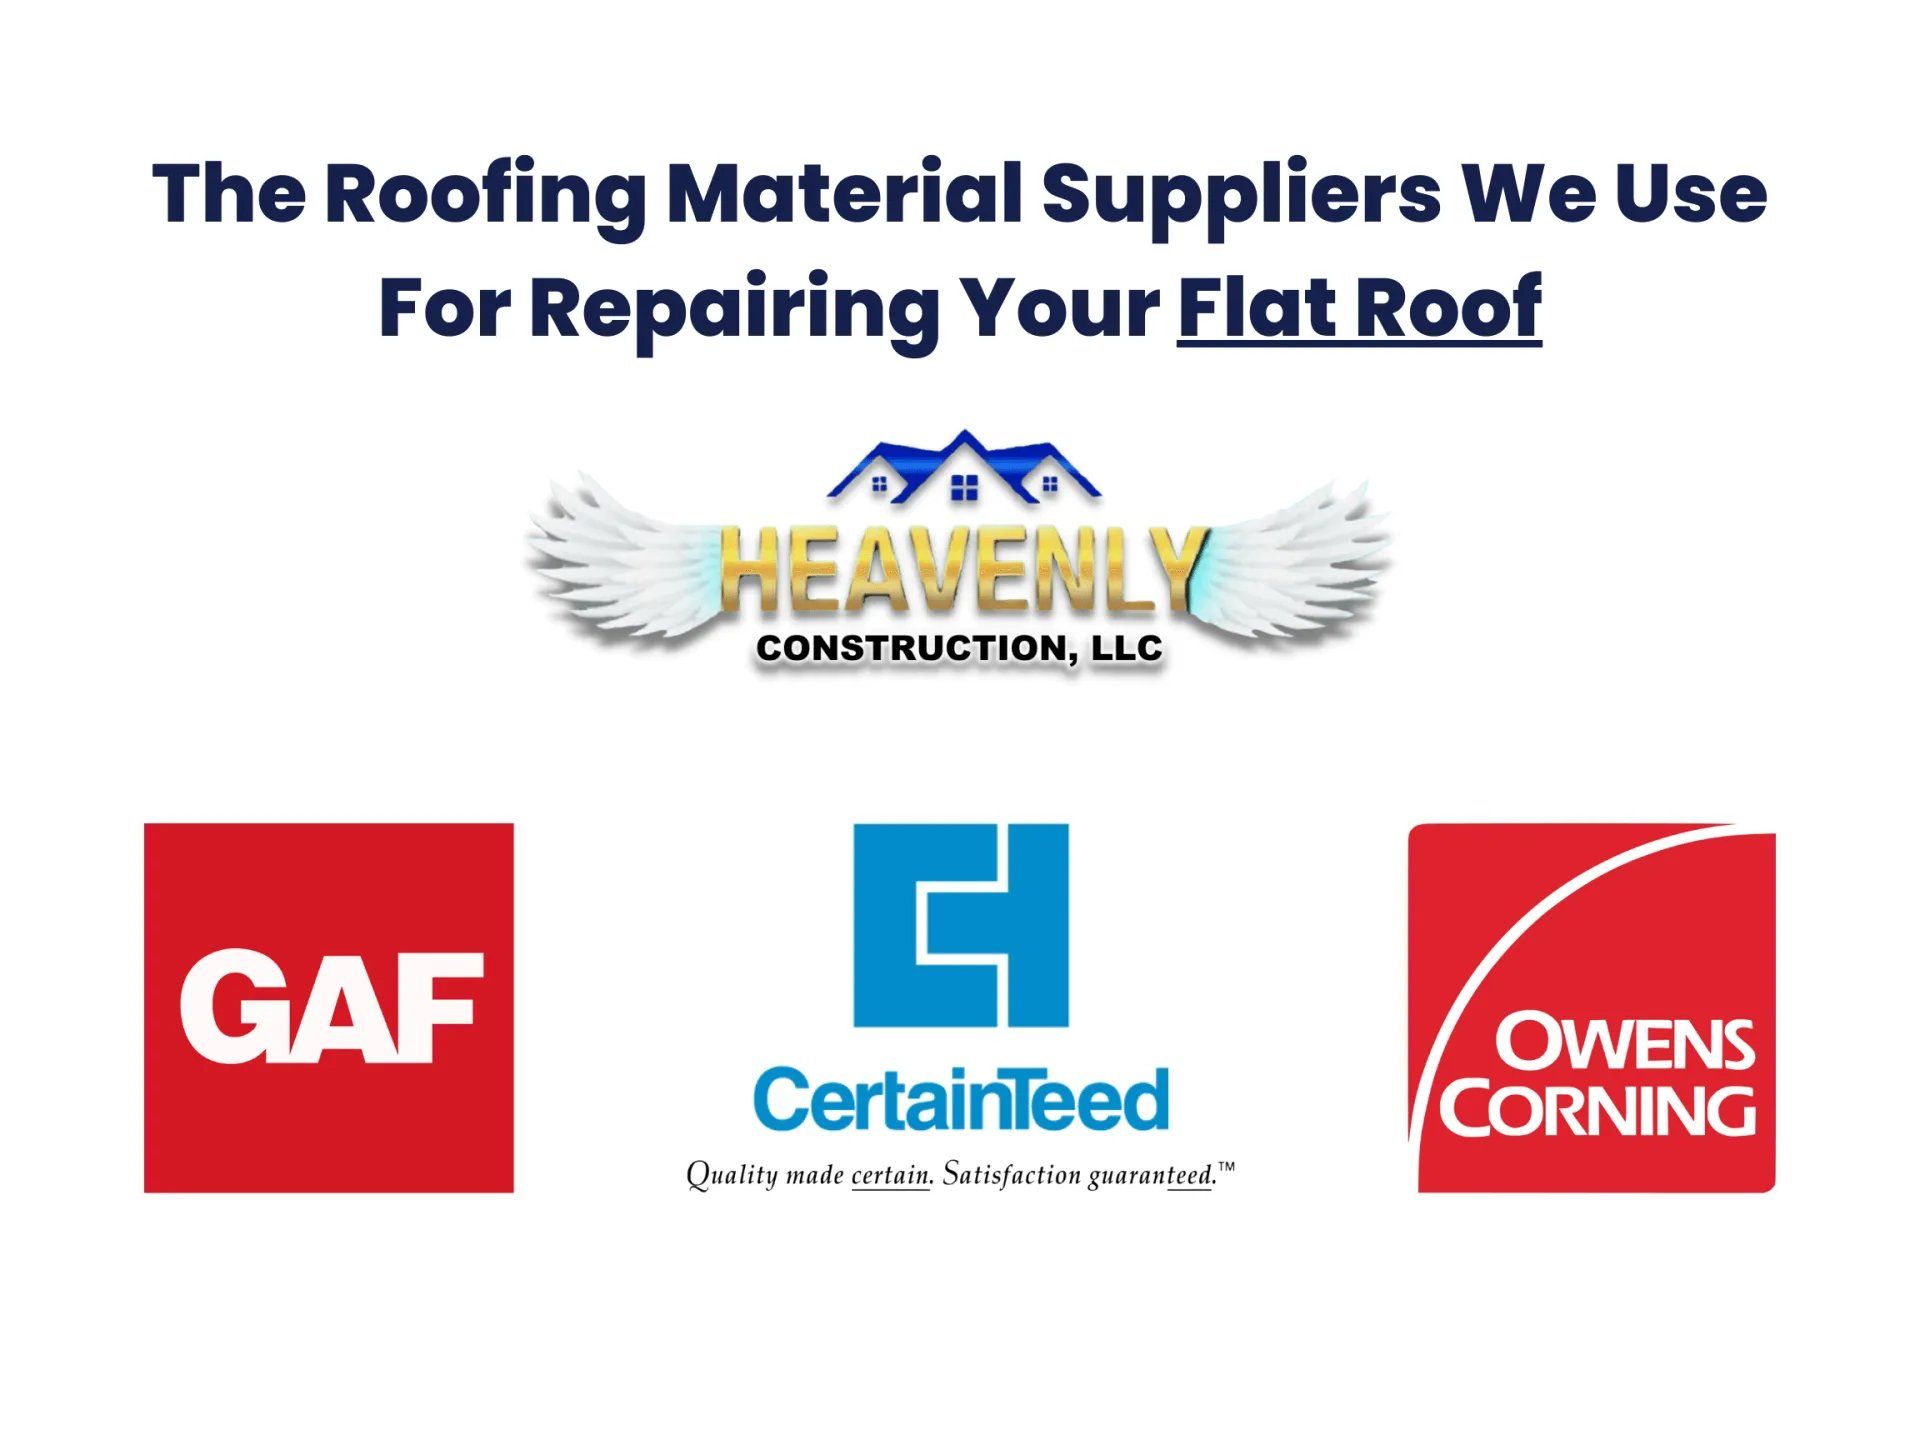 GAF, CertainTeed, and Owens Corning logos. Flat roof repair suppliers for Heavenly Construction.